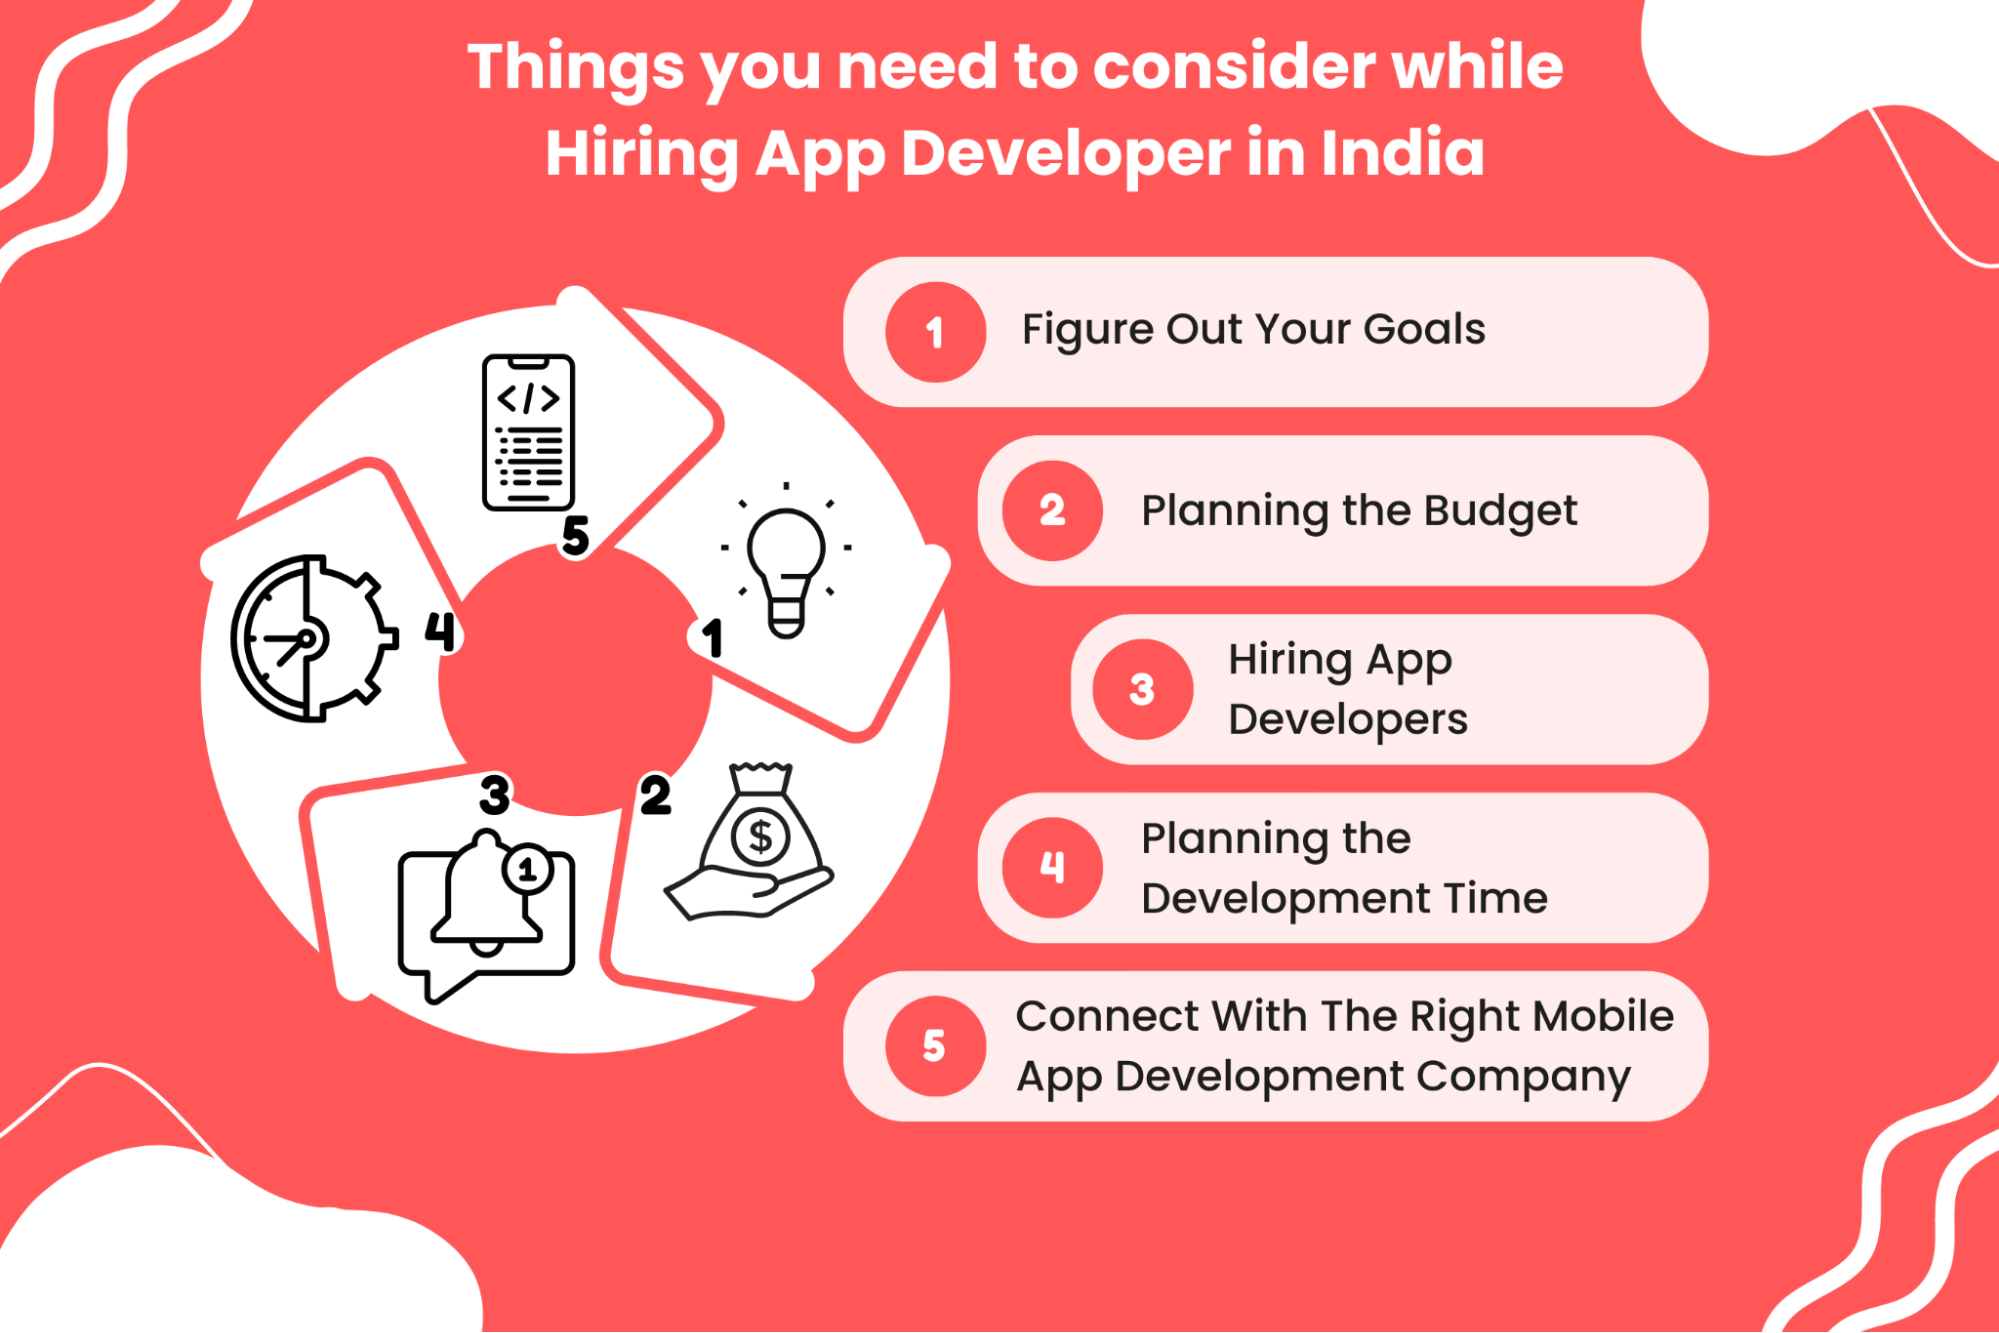 Things You Need To Consider While Hiring Indian App Developers